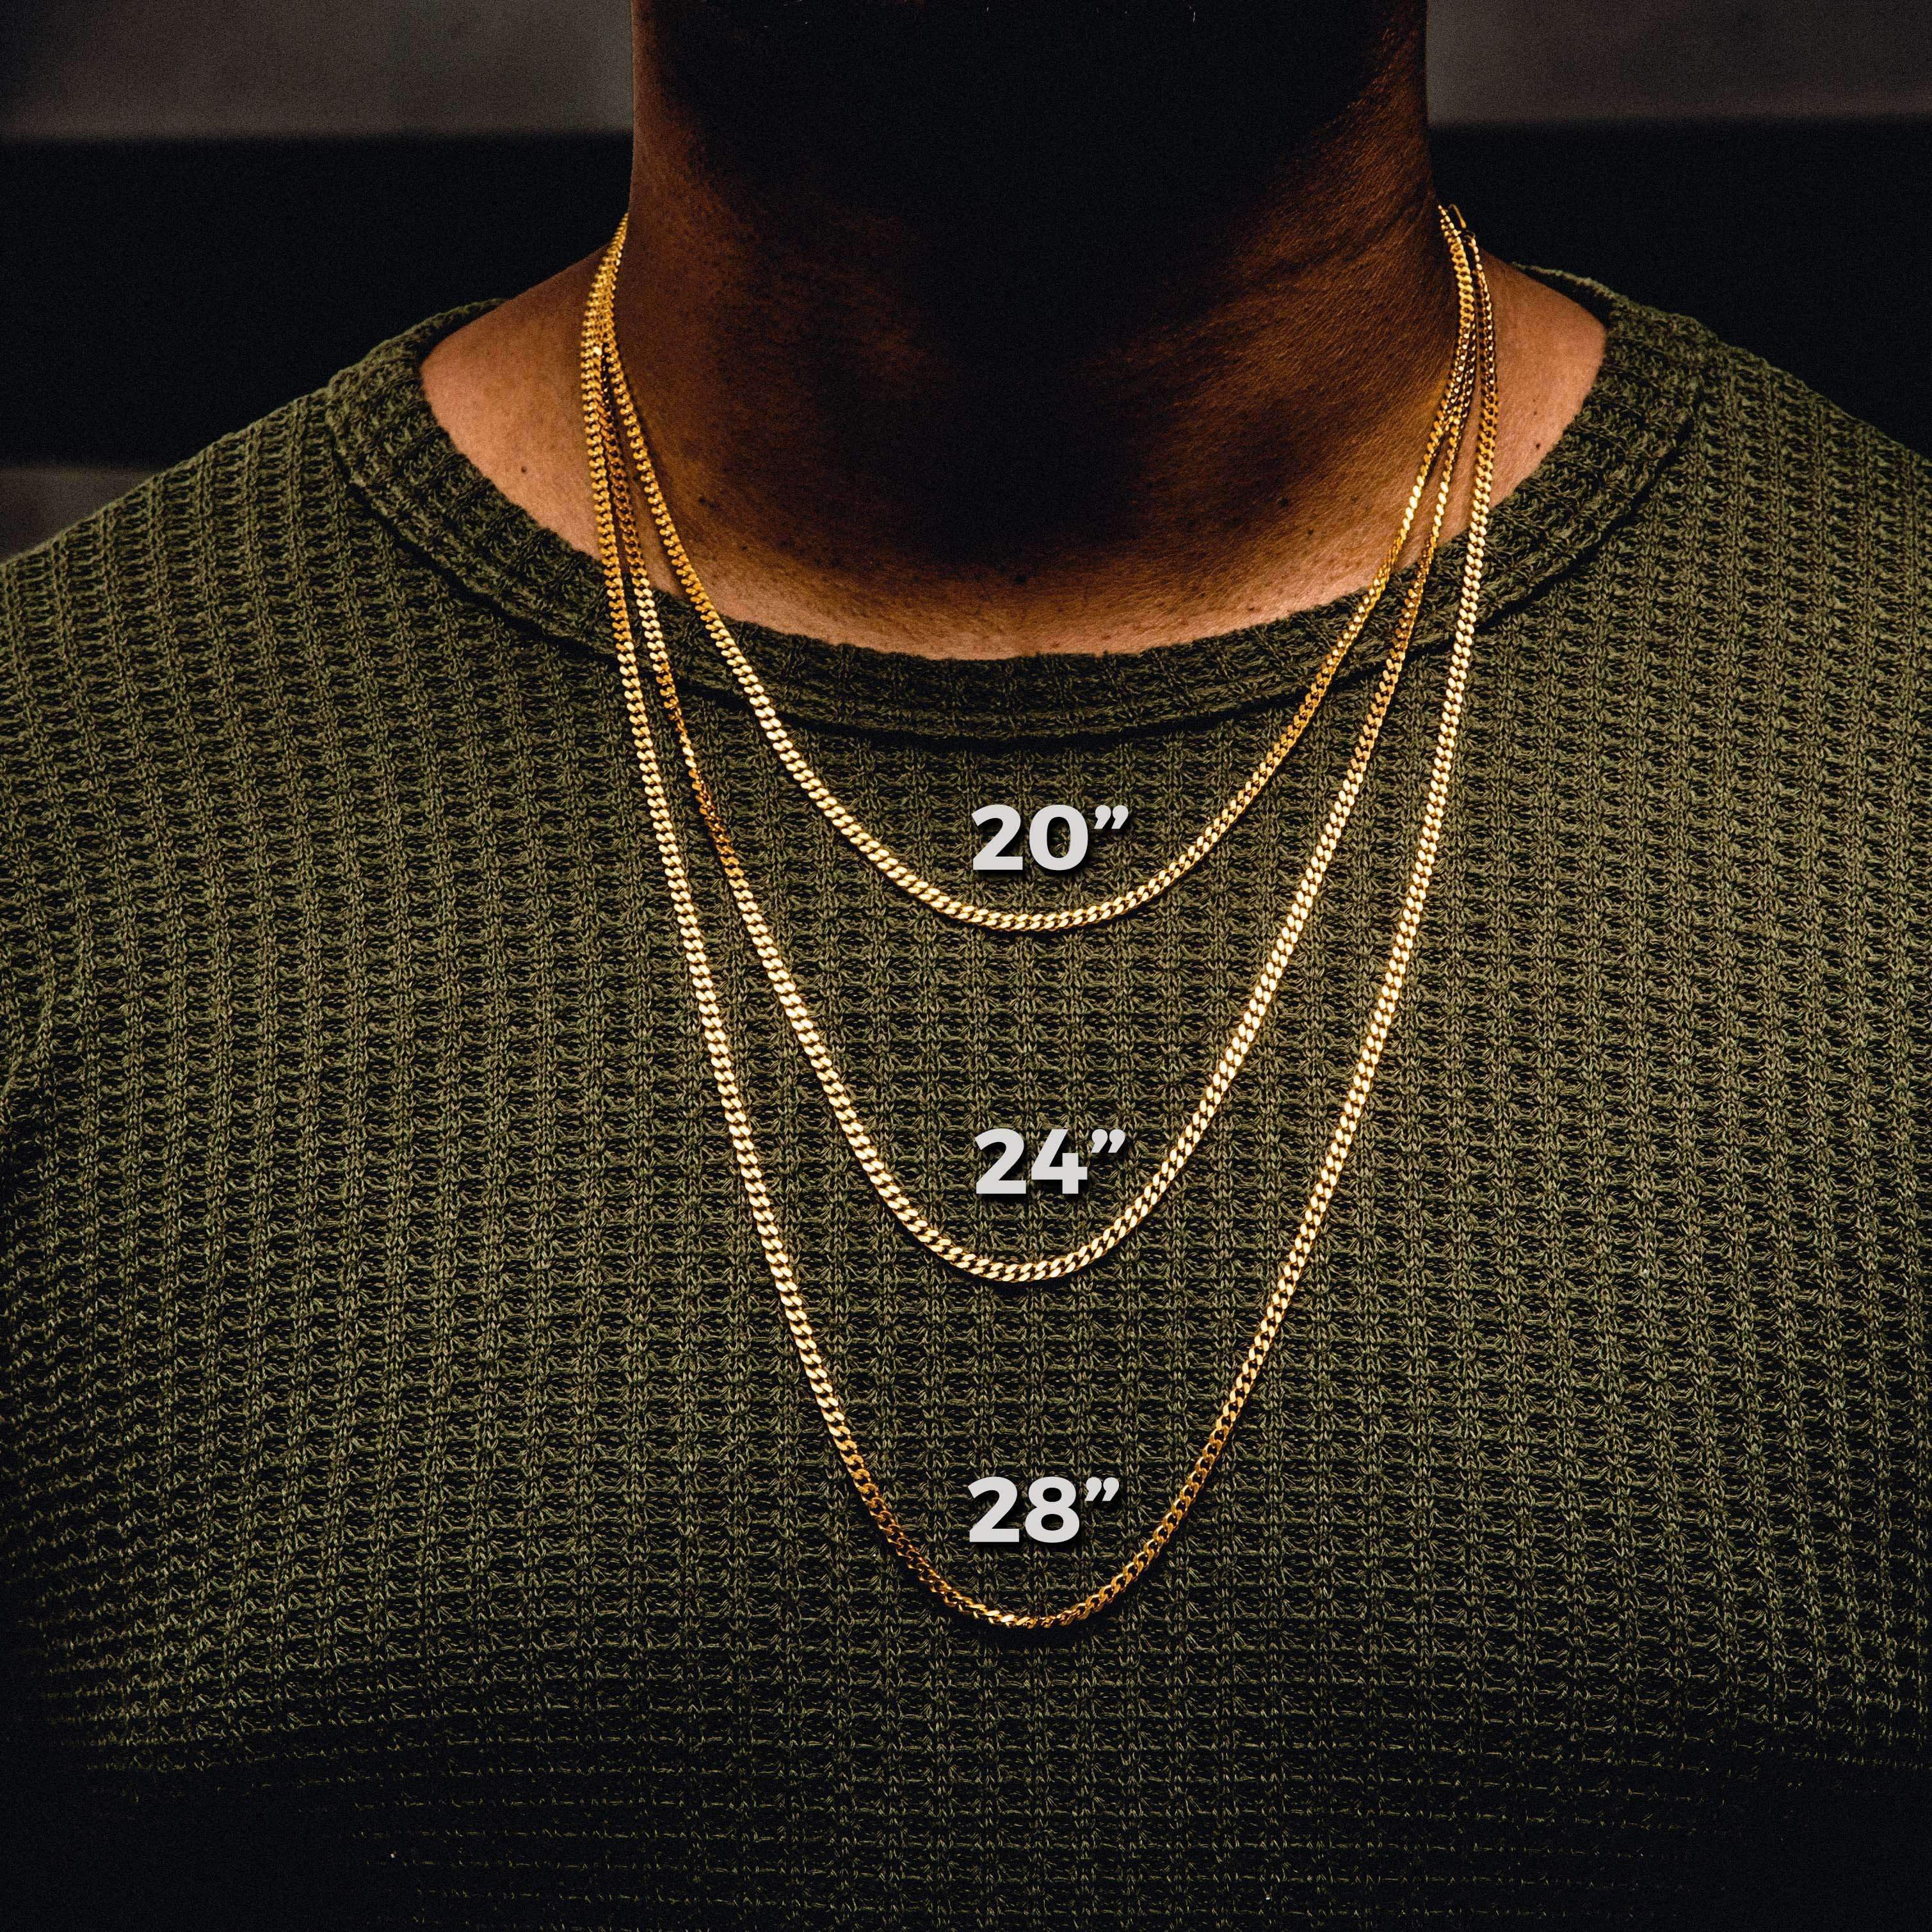 Men Necklace Length Guide: How To Measure & Choose The Right Necklace Chain Length